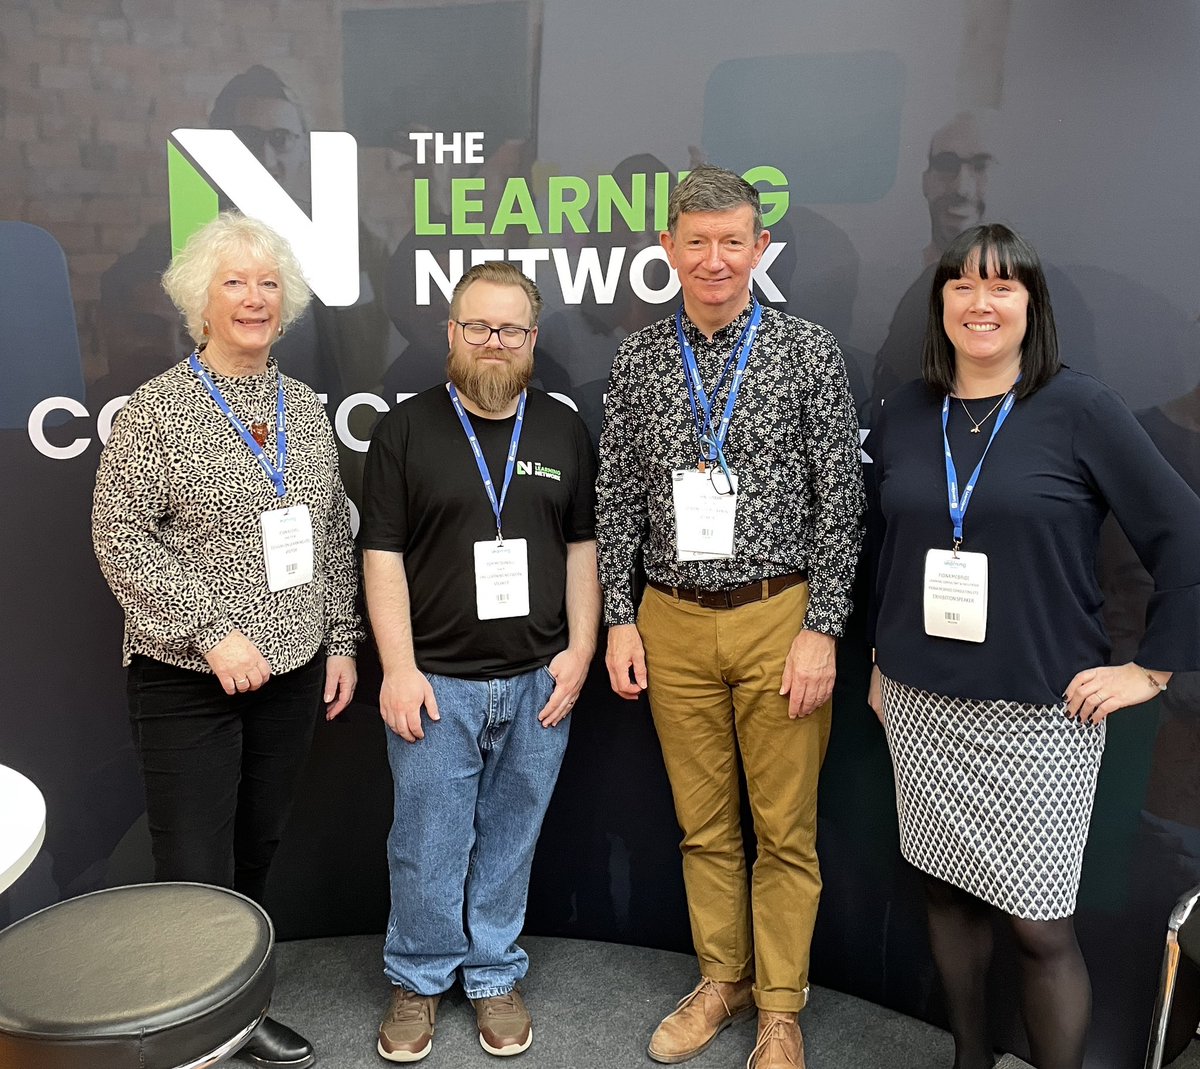 With the Learning Network at #wol24  @Designs_JoanK @learningnetwk @fionamcbride @IDT_TM